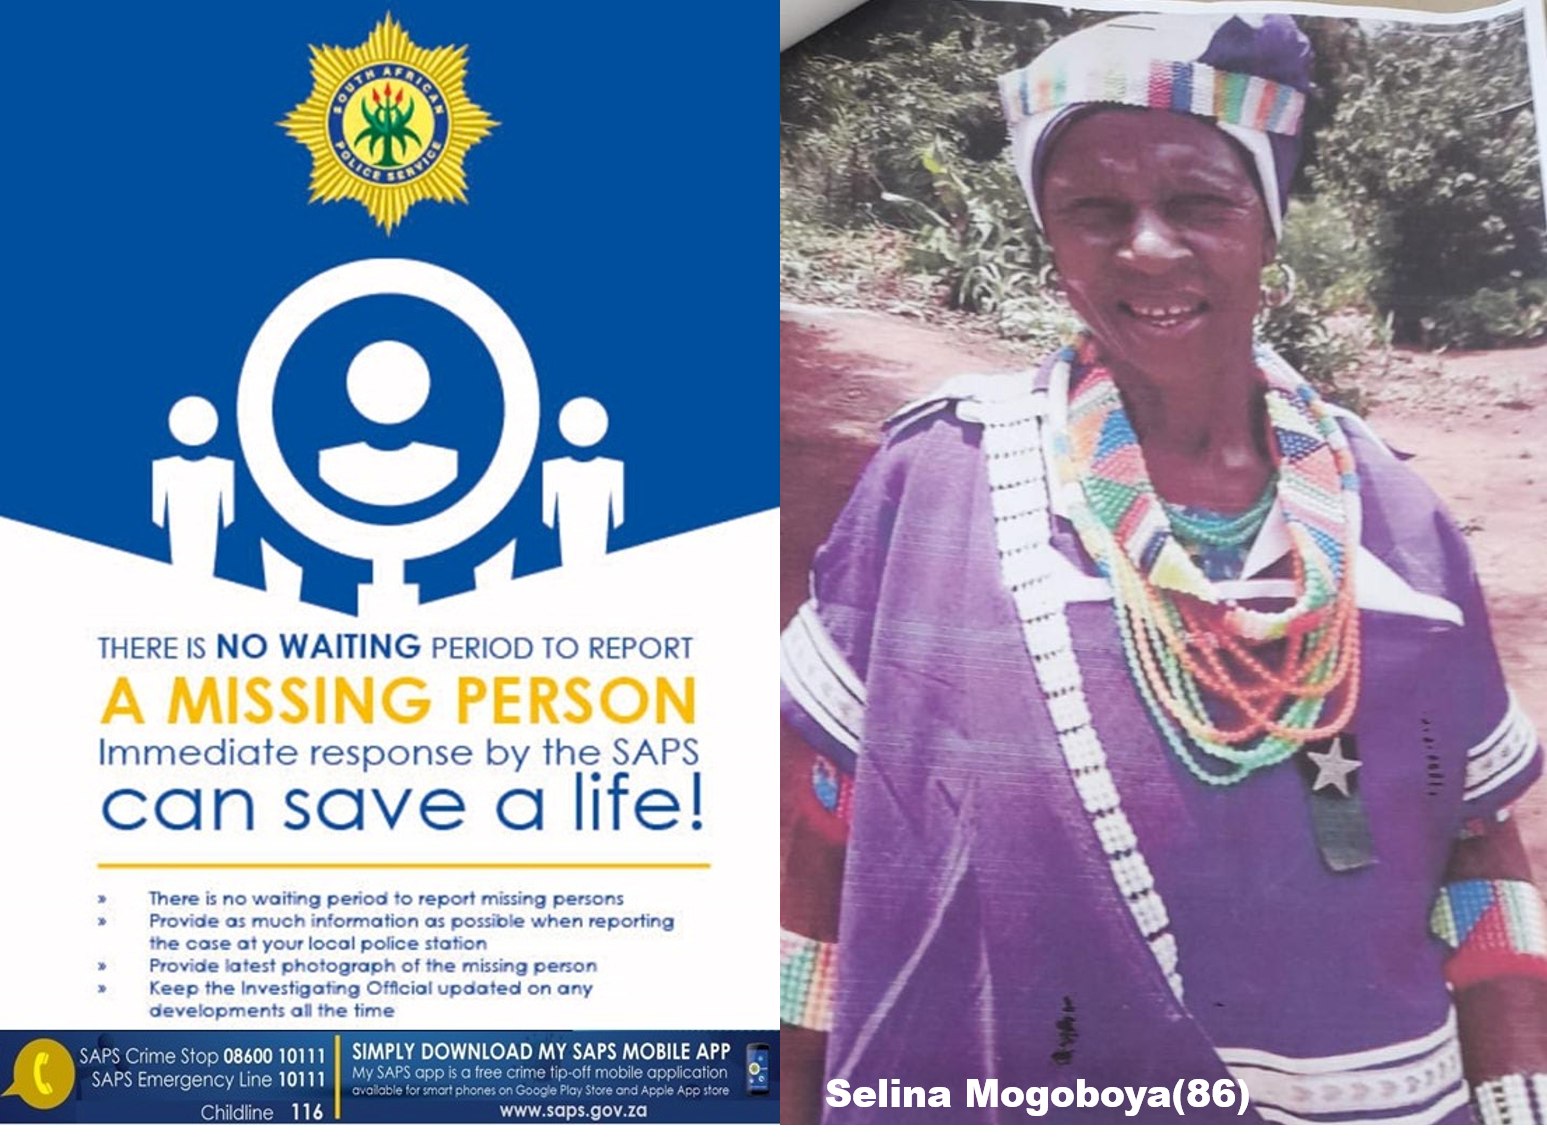 Police launches extensive search for two missing persons in separate incidents